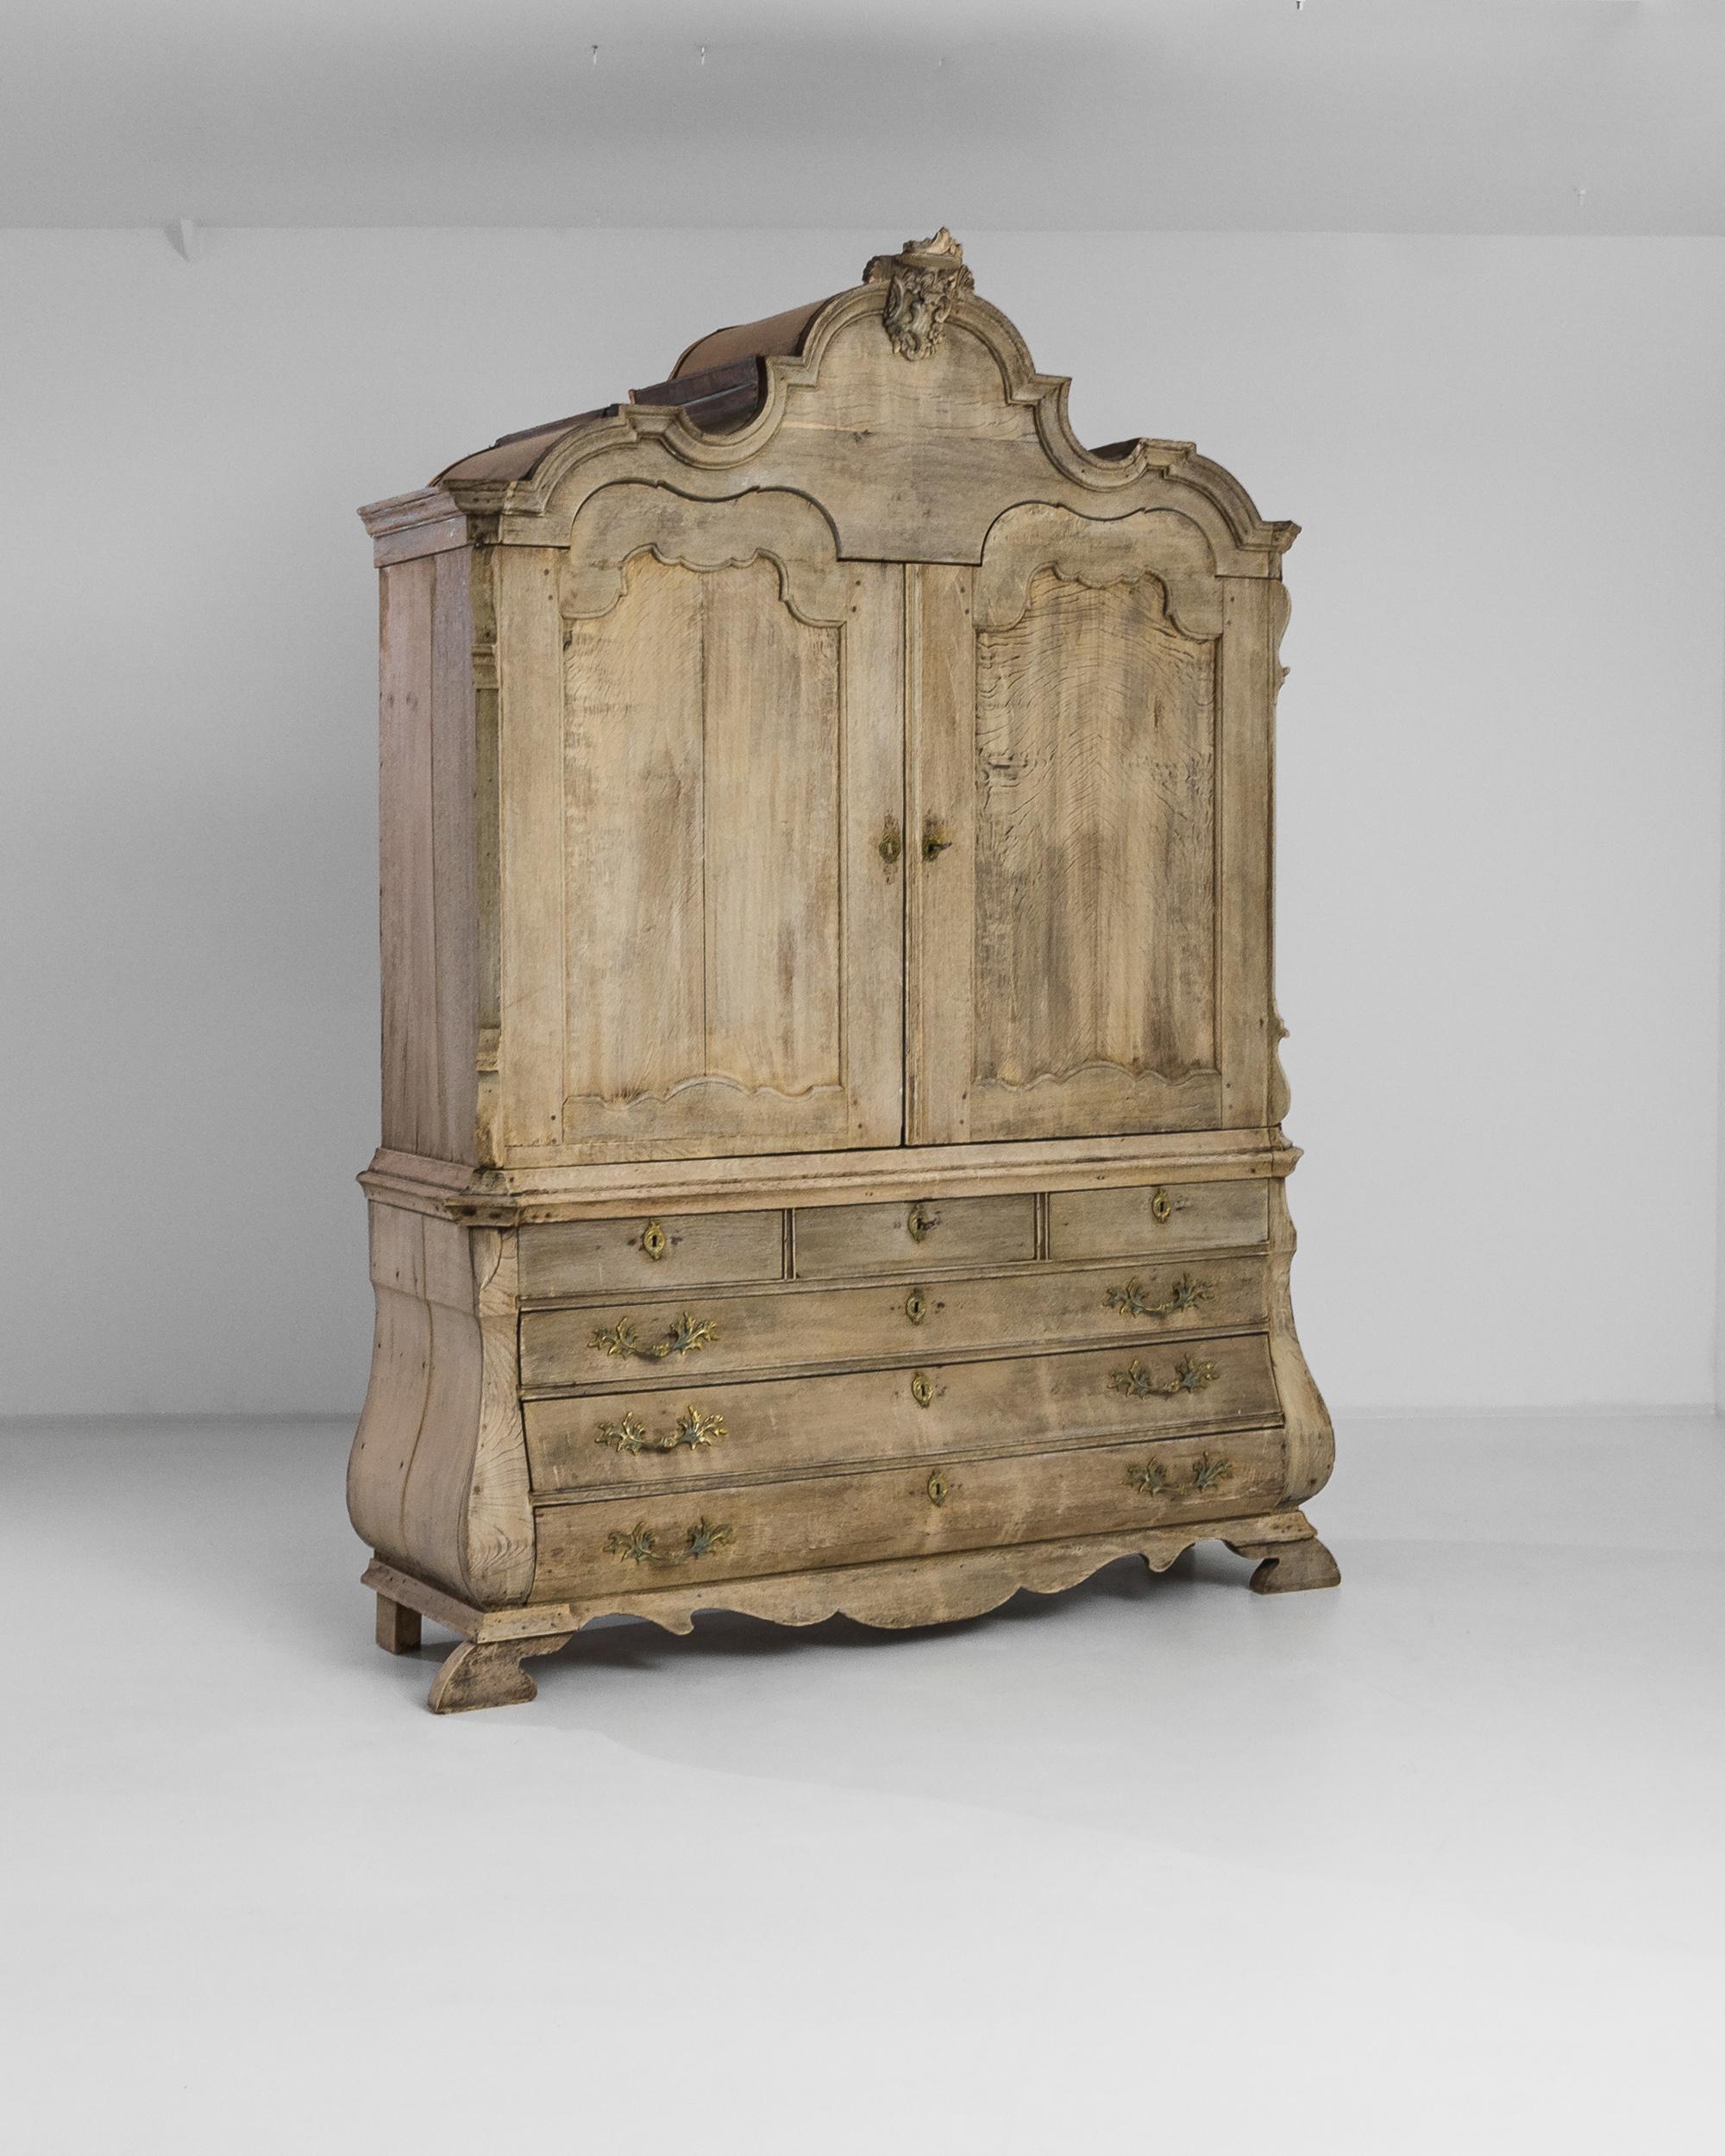 This bleached oak cabinet was produced in the Netherlands at the end of the 18th Century. A tall wooden case rests on a slightly bombé chest featuring an arrangement of six drawers, completed by three hidden ones inside the upper chest. The two